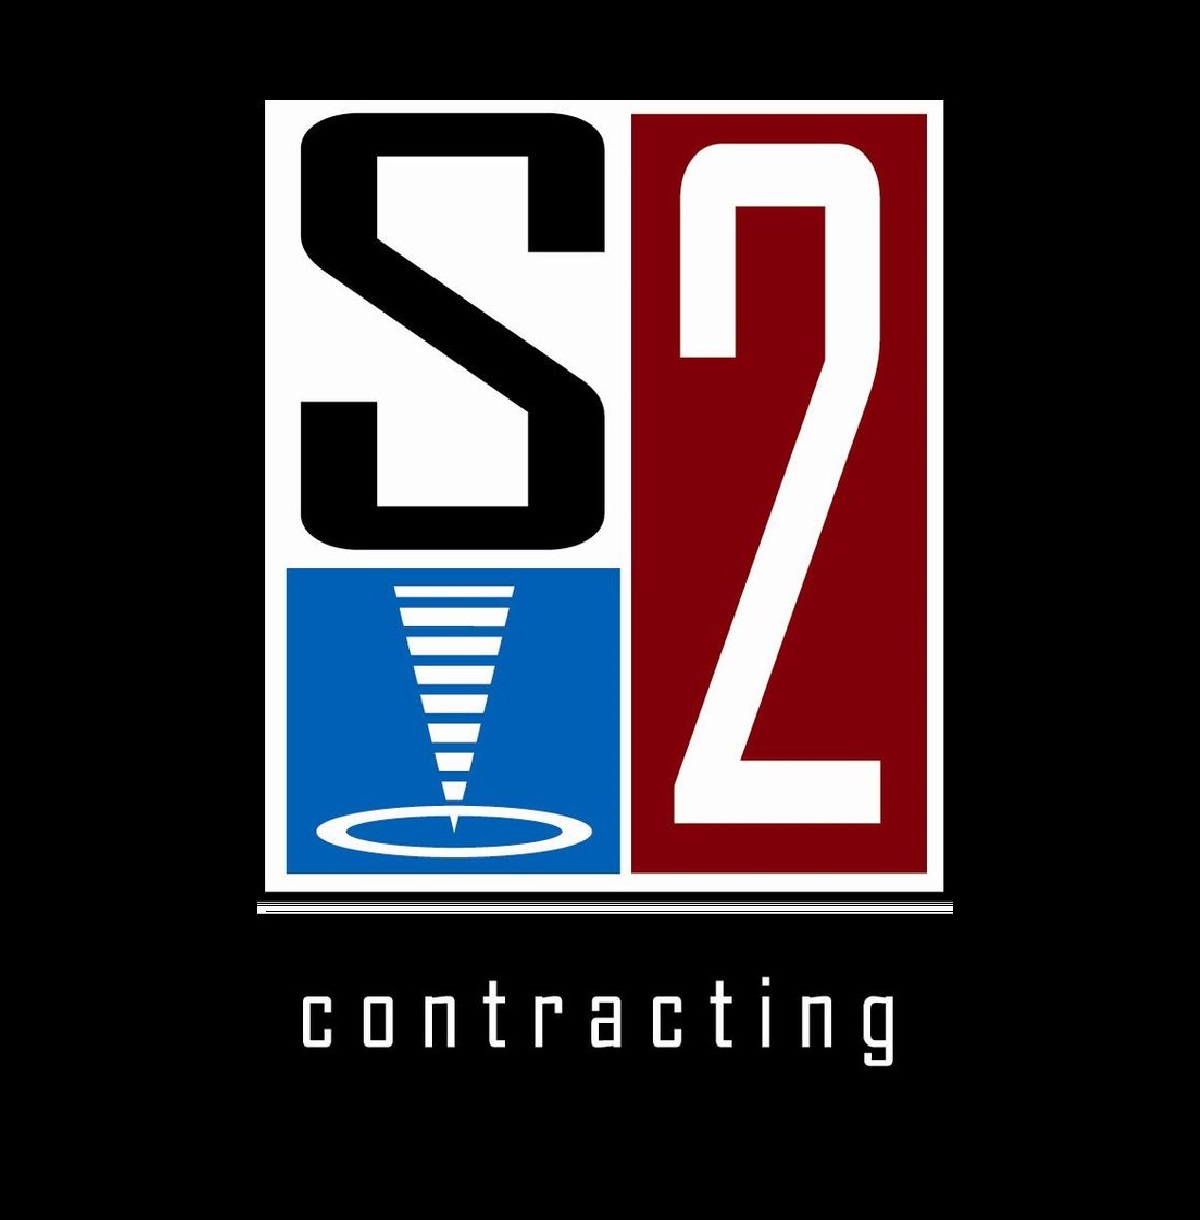 S2A General contracting